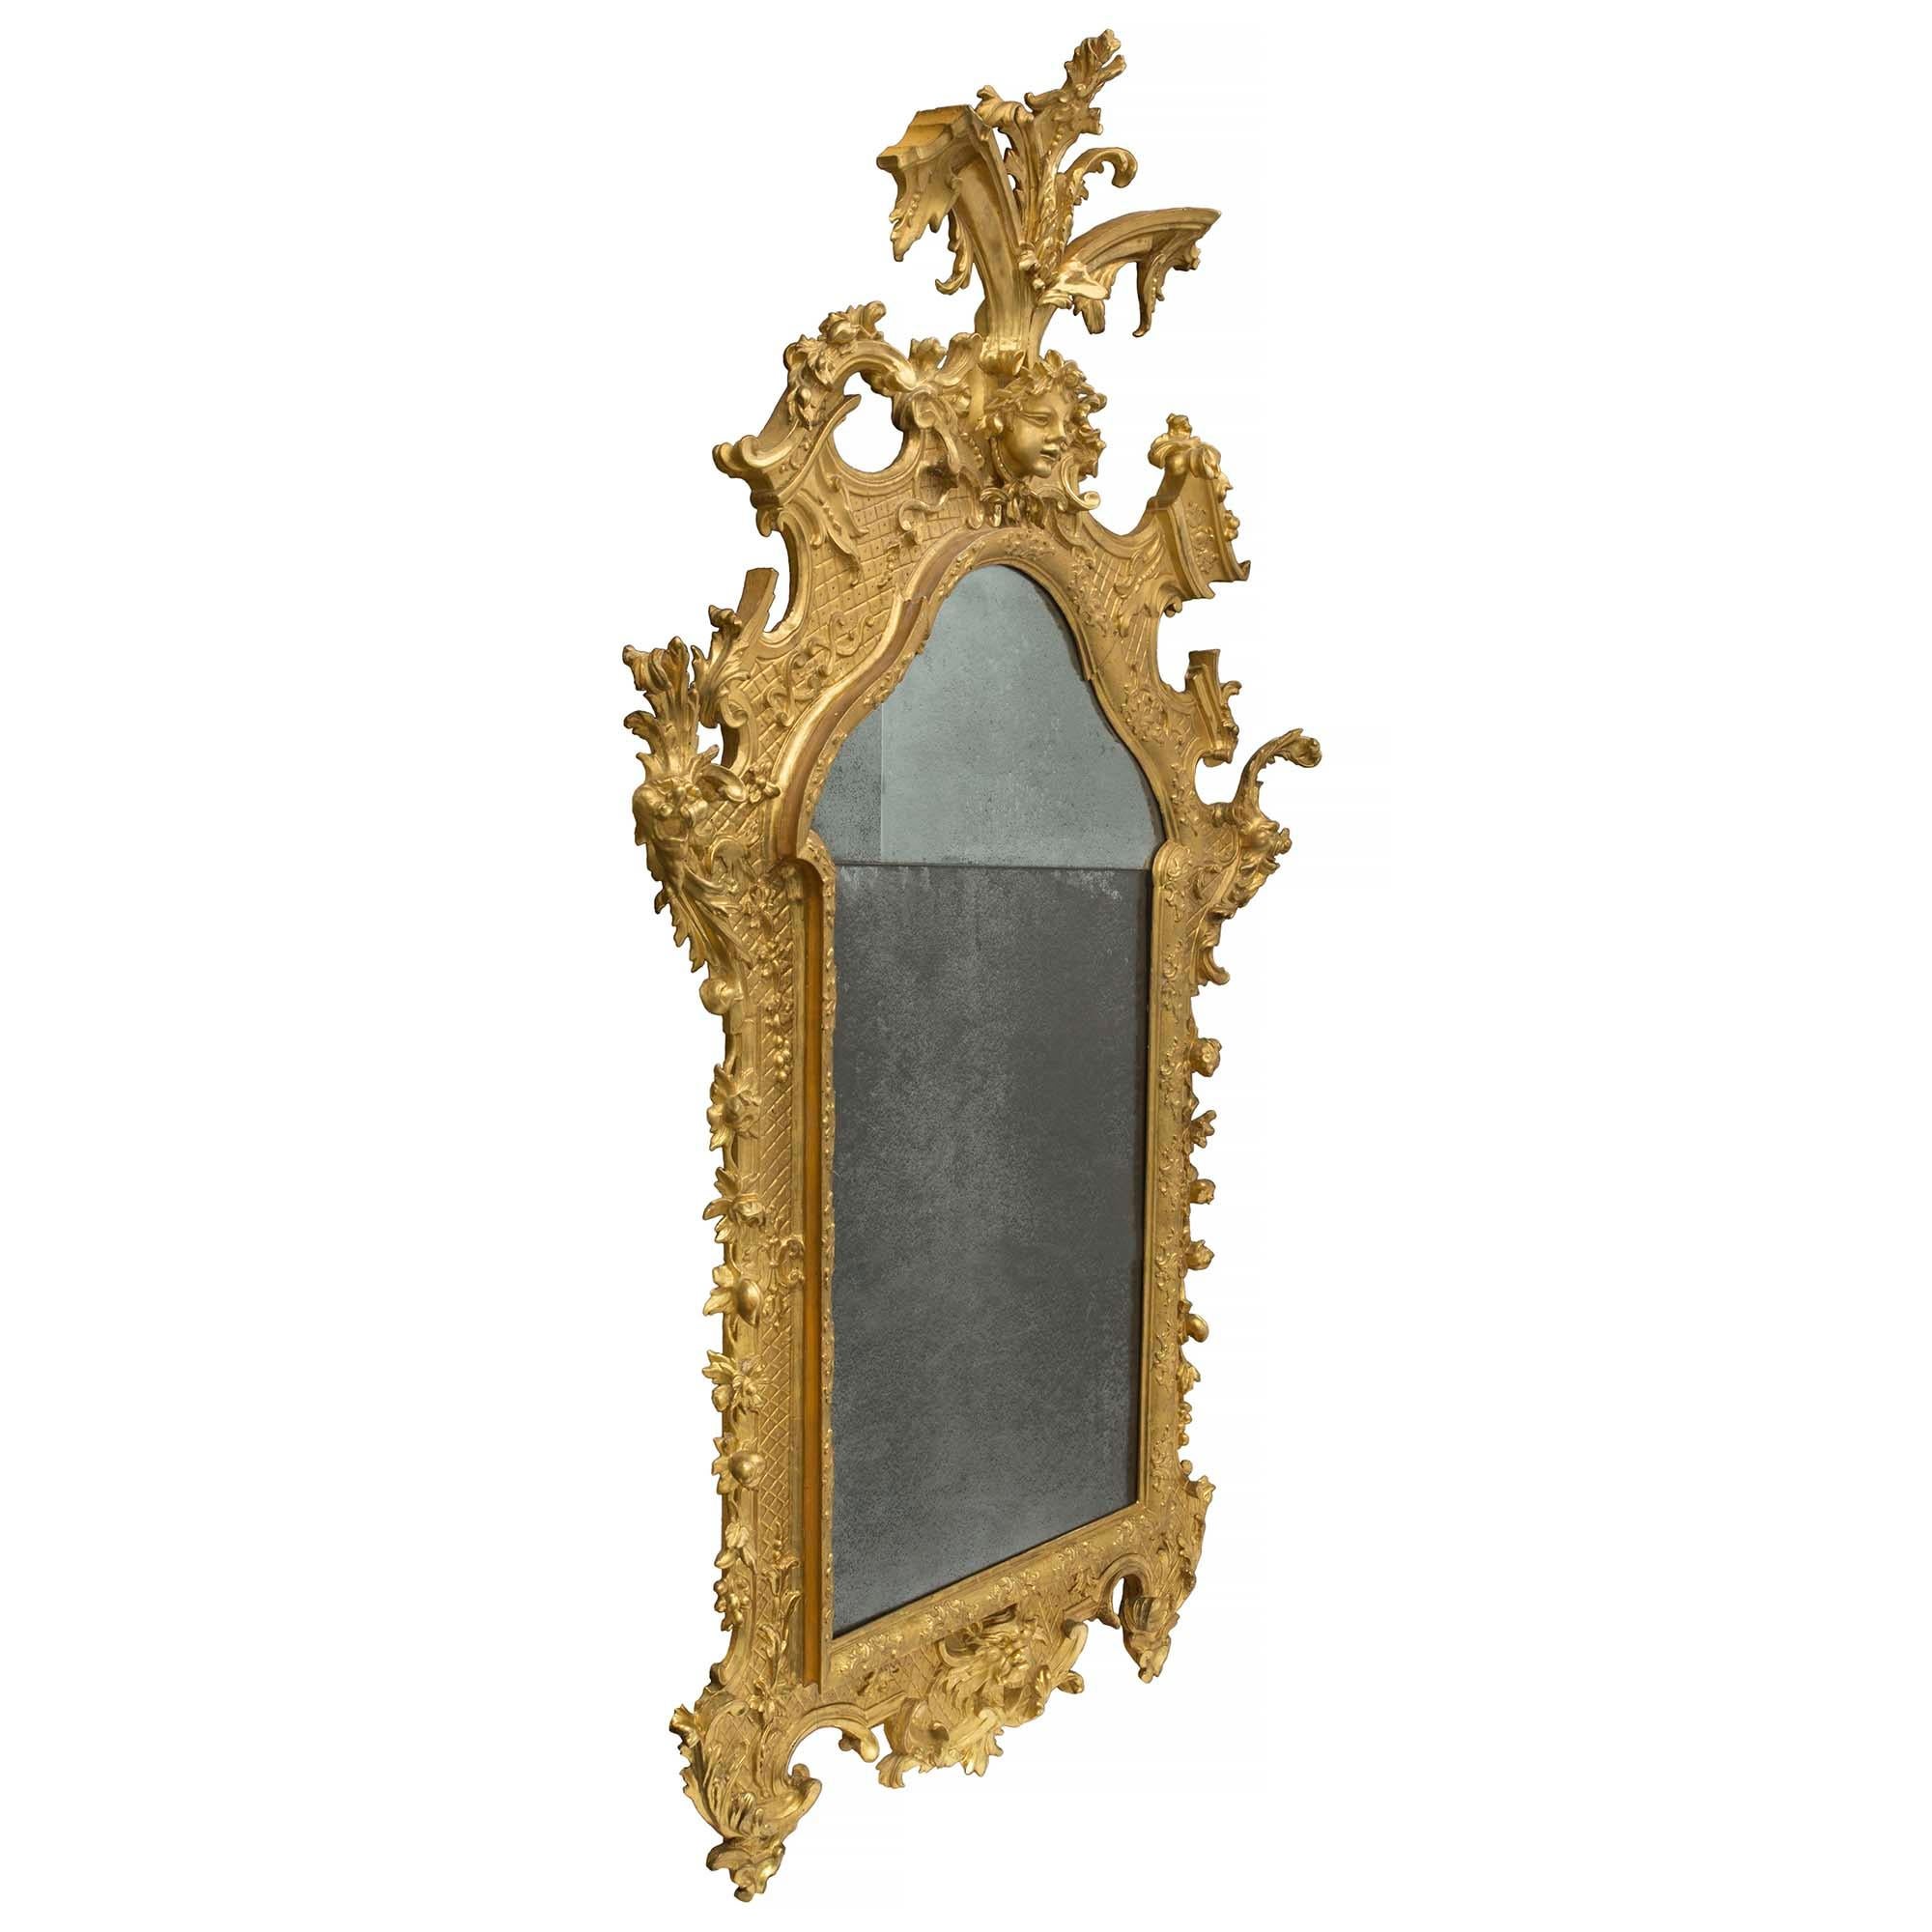 Italian 18th Century Baroque Period Giltwood Mirror In Good Condition For Sale In West Palm Beach, FL